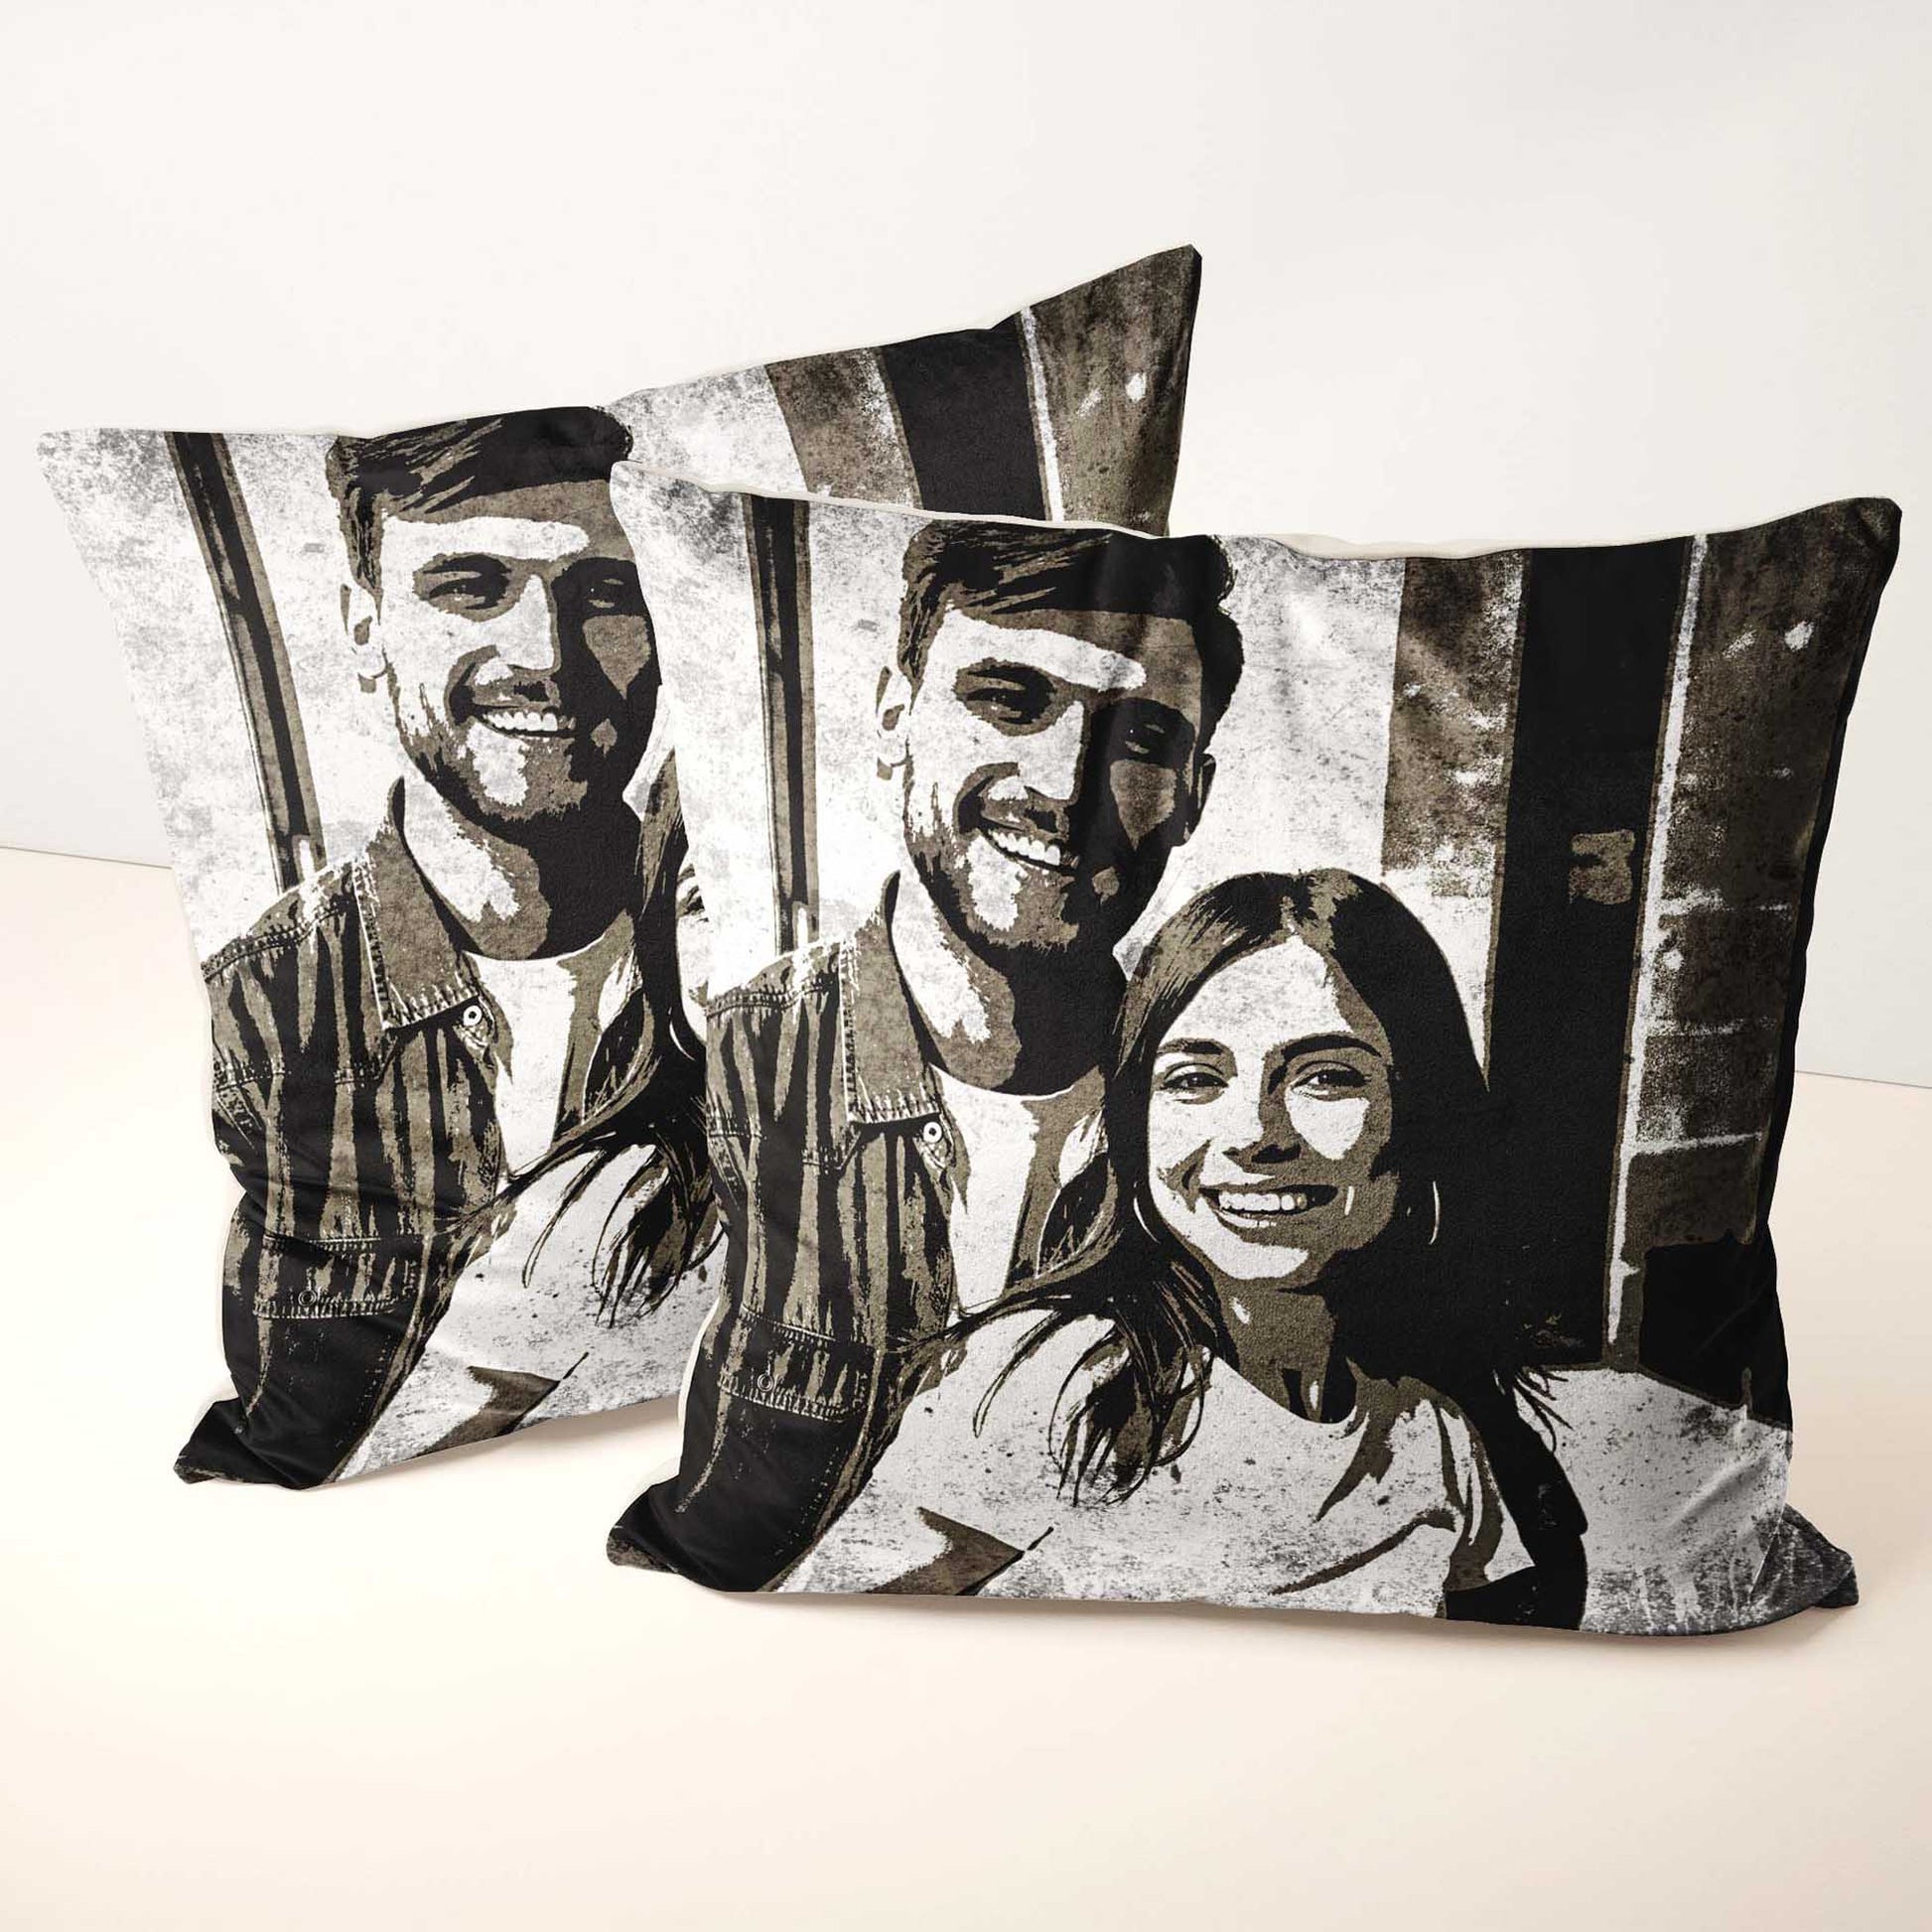 Add a touch of urban charm to your home with the Personalised Black & White Street Art Cushion. Made from soft velvet, this cushion features a captivating graffiti print that brings an edgy yet elegant vibe to your interior, chic design